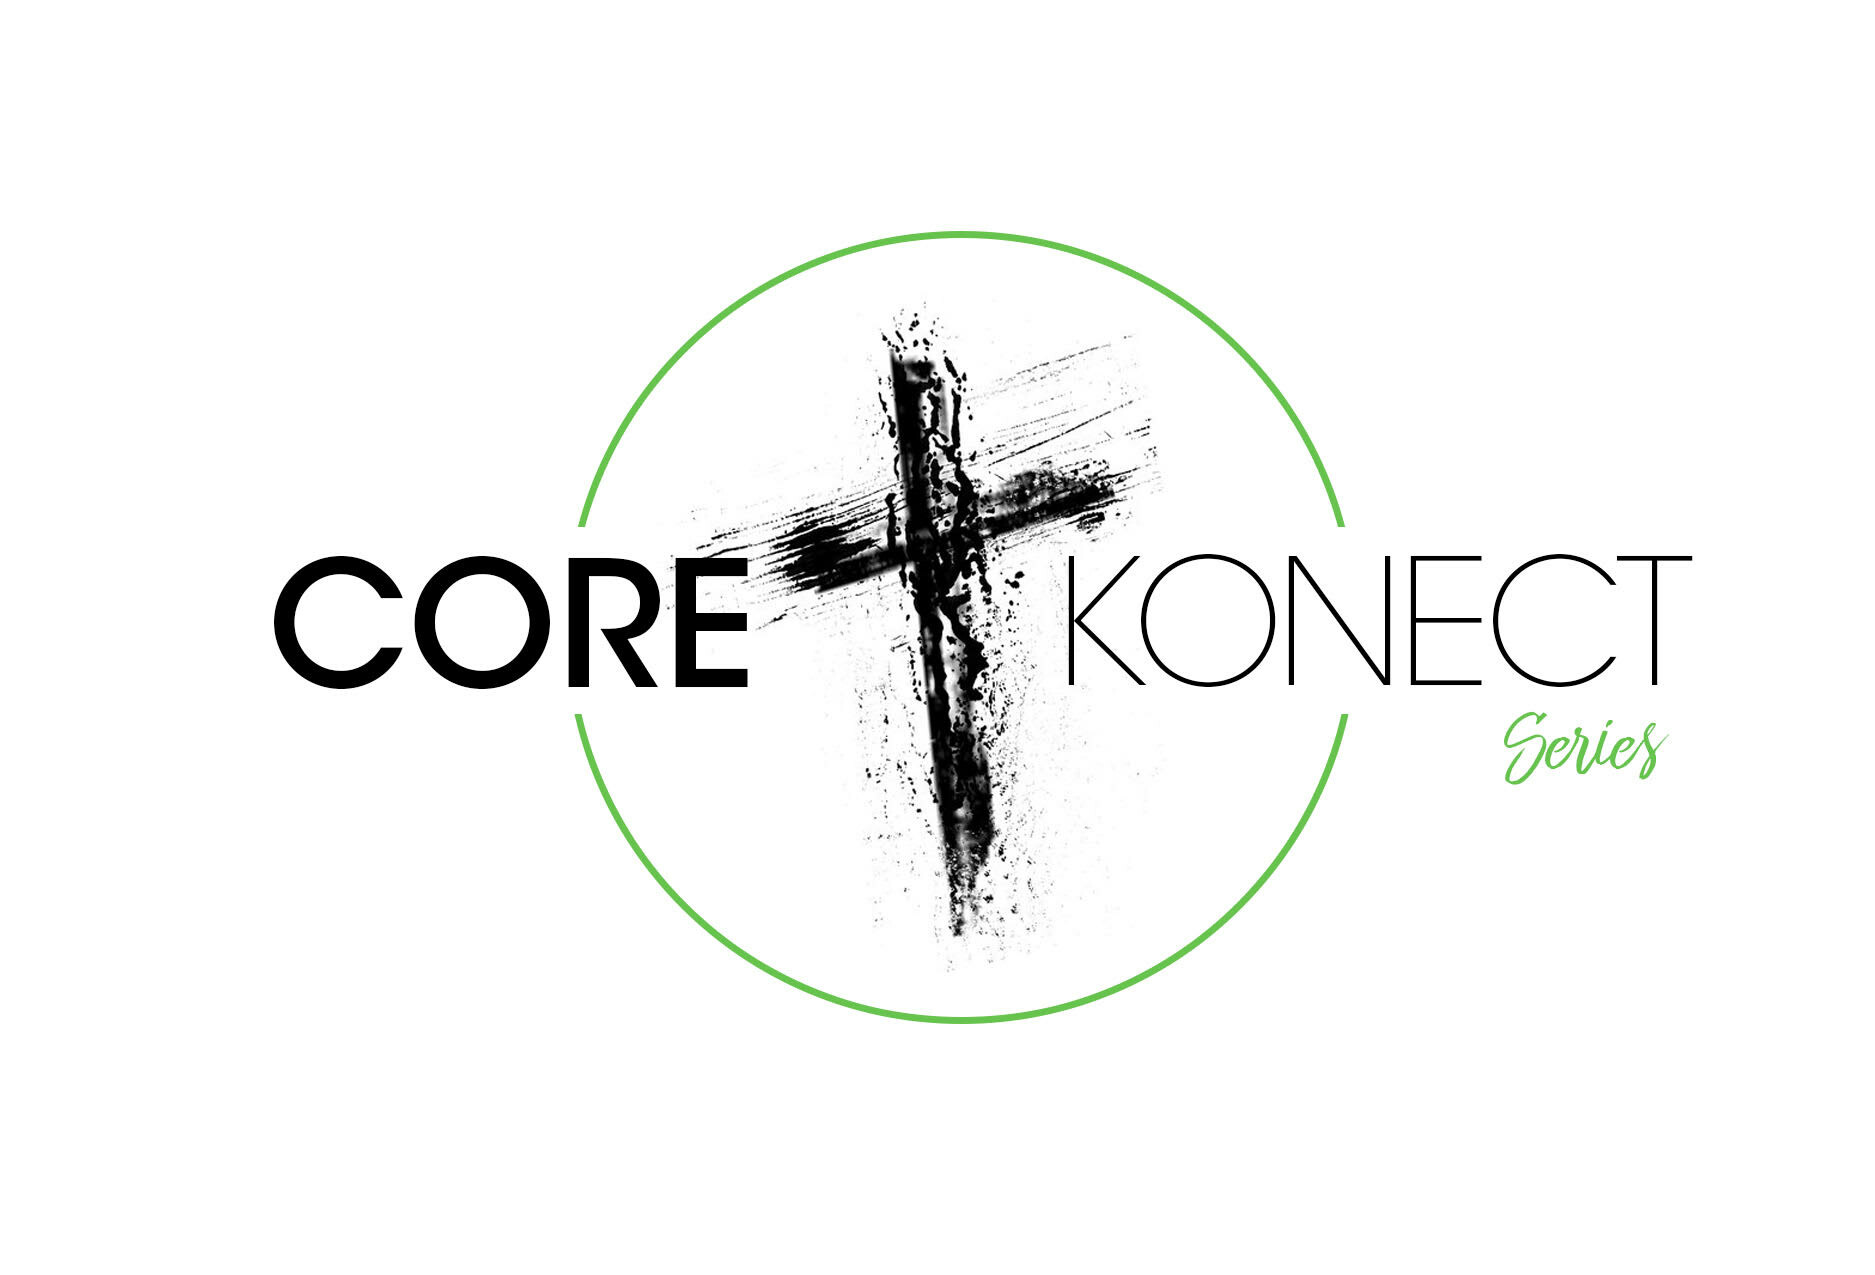 Core Konect: Growing Together